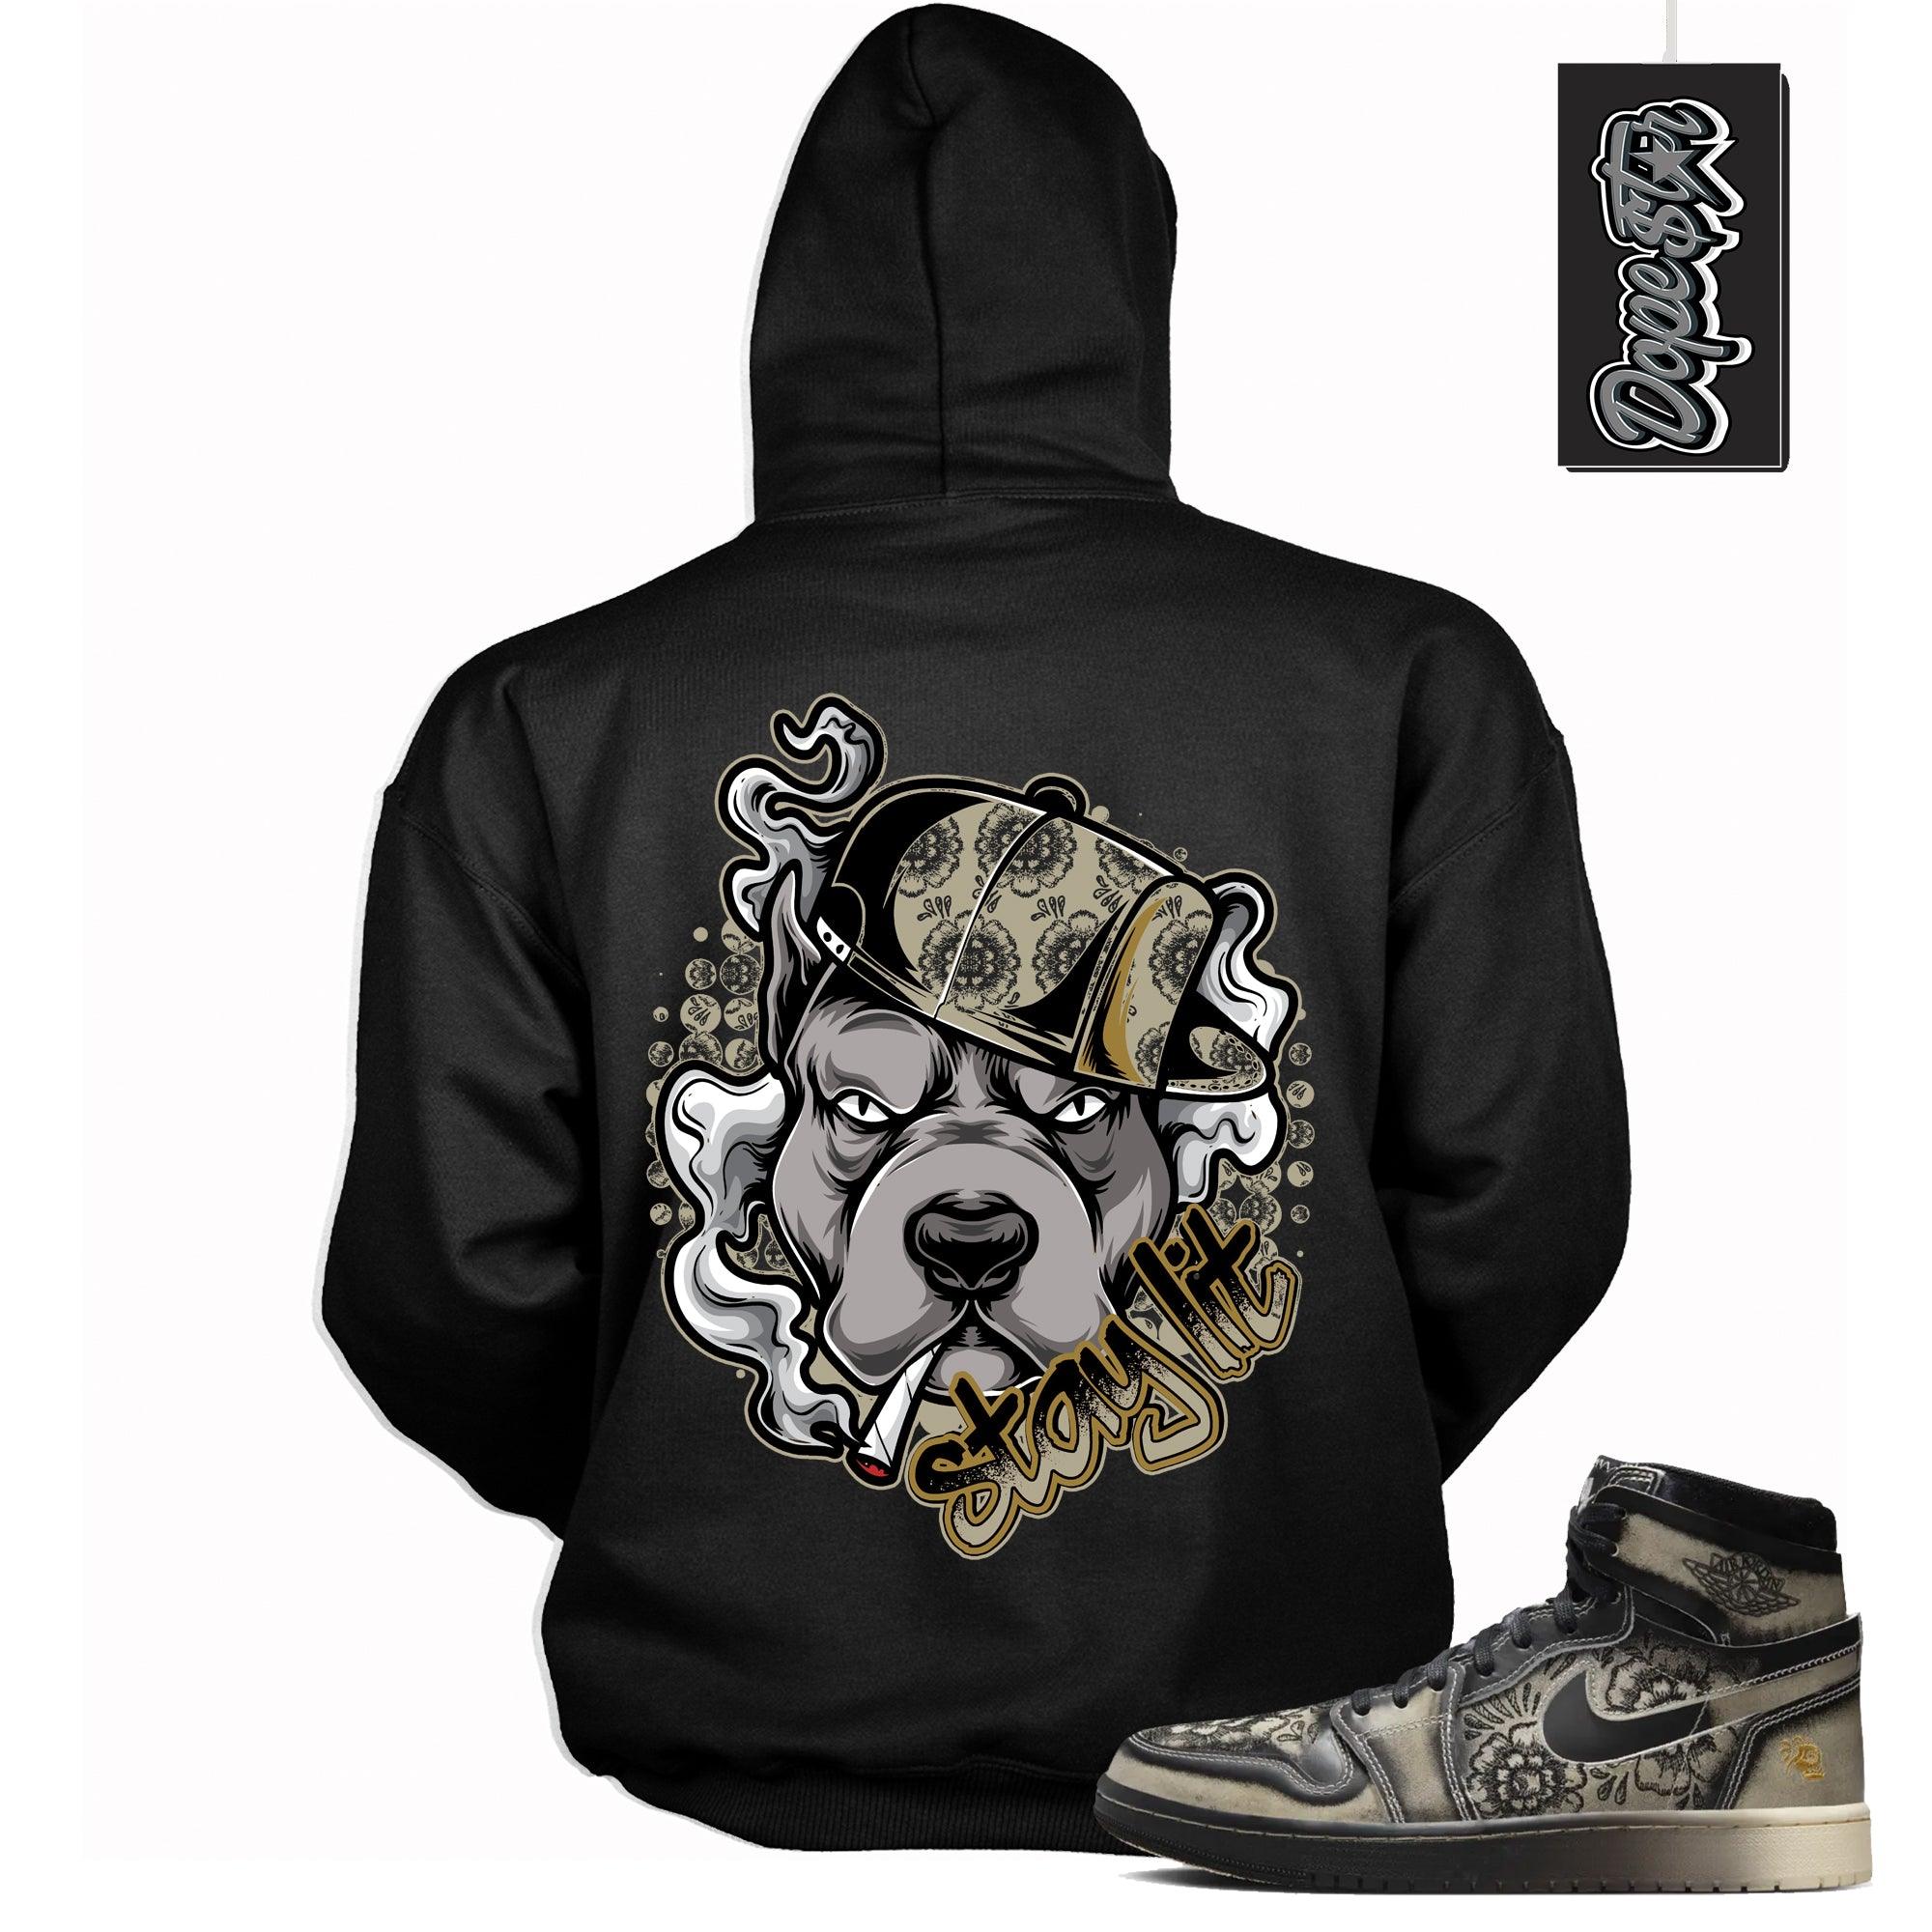 Cool Black Graphic Hoodie with “ STAY LIT “ print, that perfectly matches Air Jordan 1 High Zoom Comfort 2 Dia de Muertos Black and Pale Ivory sneakers